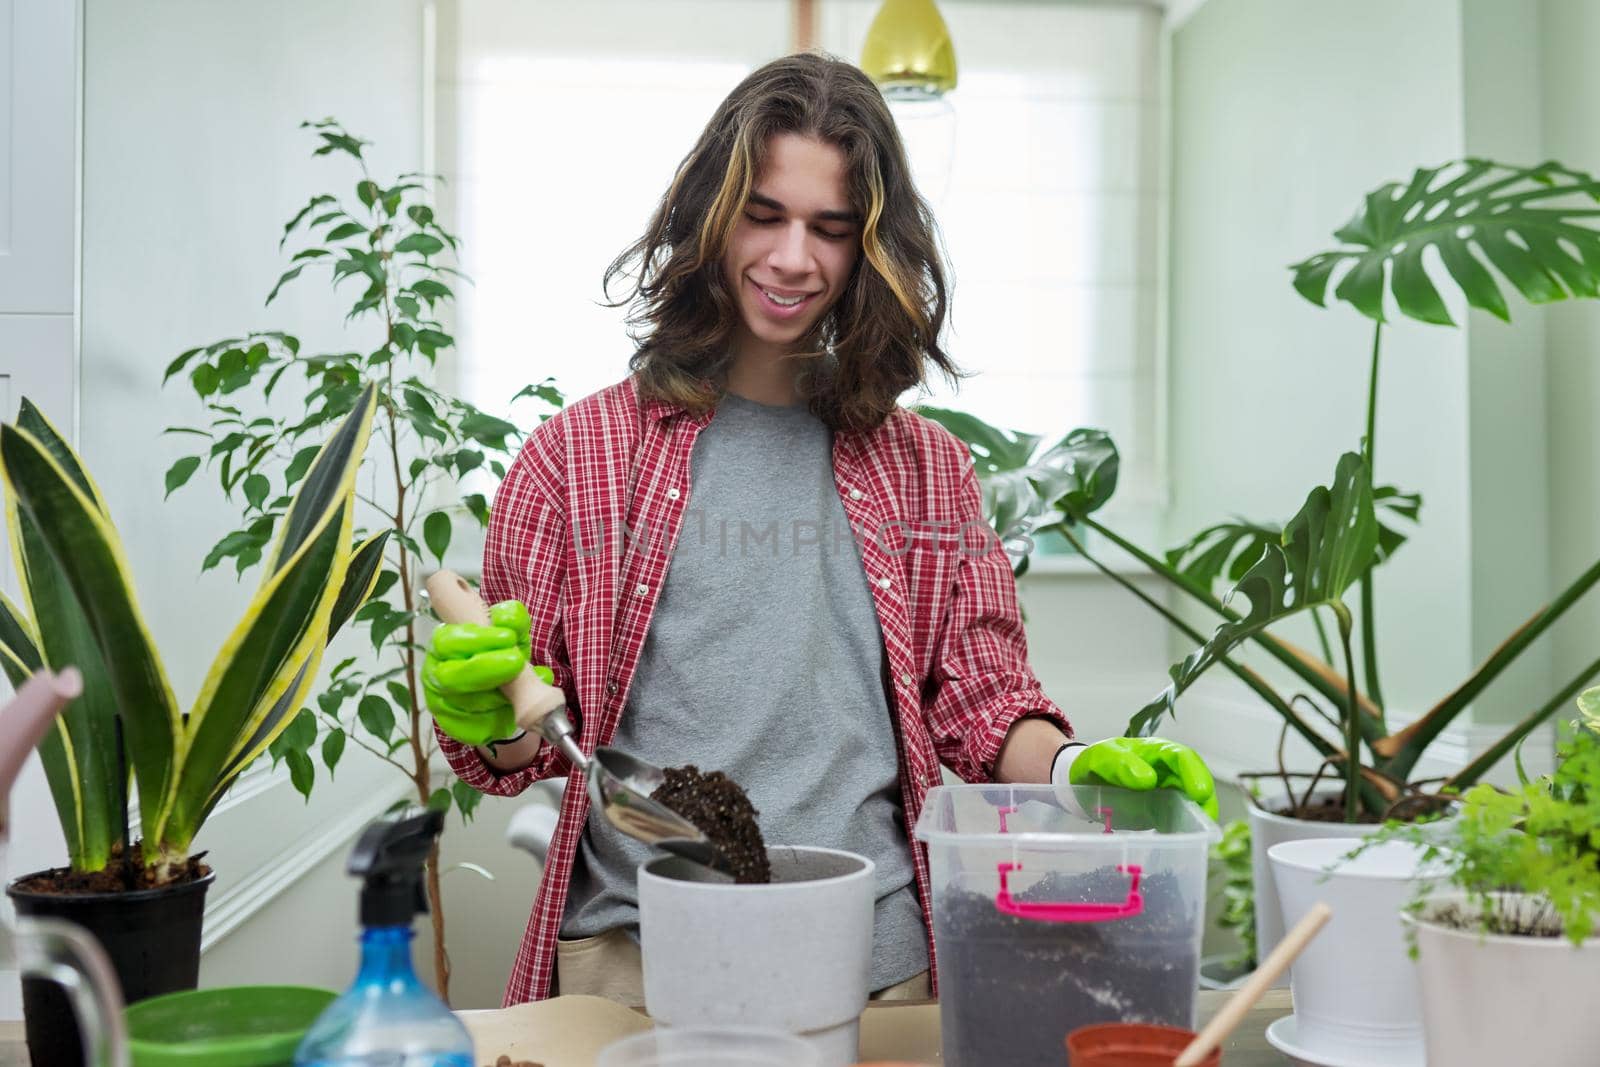 Guy teenager caring replanting indoor plants in pots. On the table are soil, pots, plants, fertilizers, watering can. Floristry hobby of young teen boy